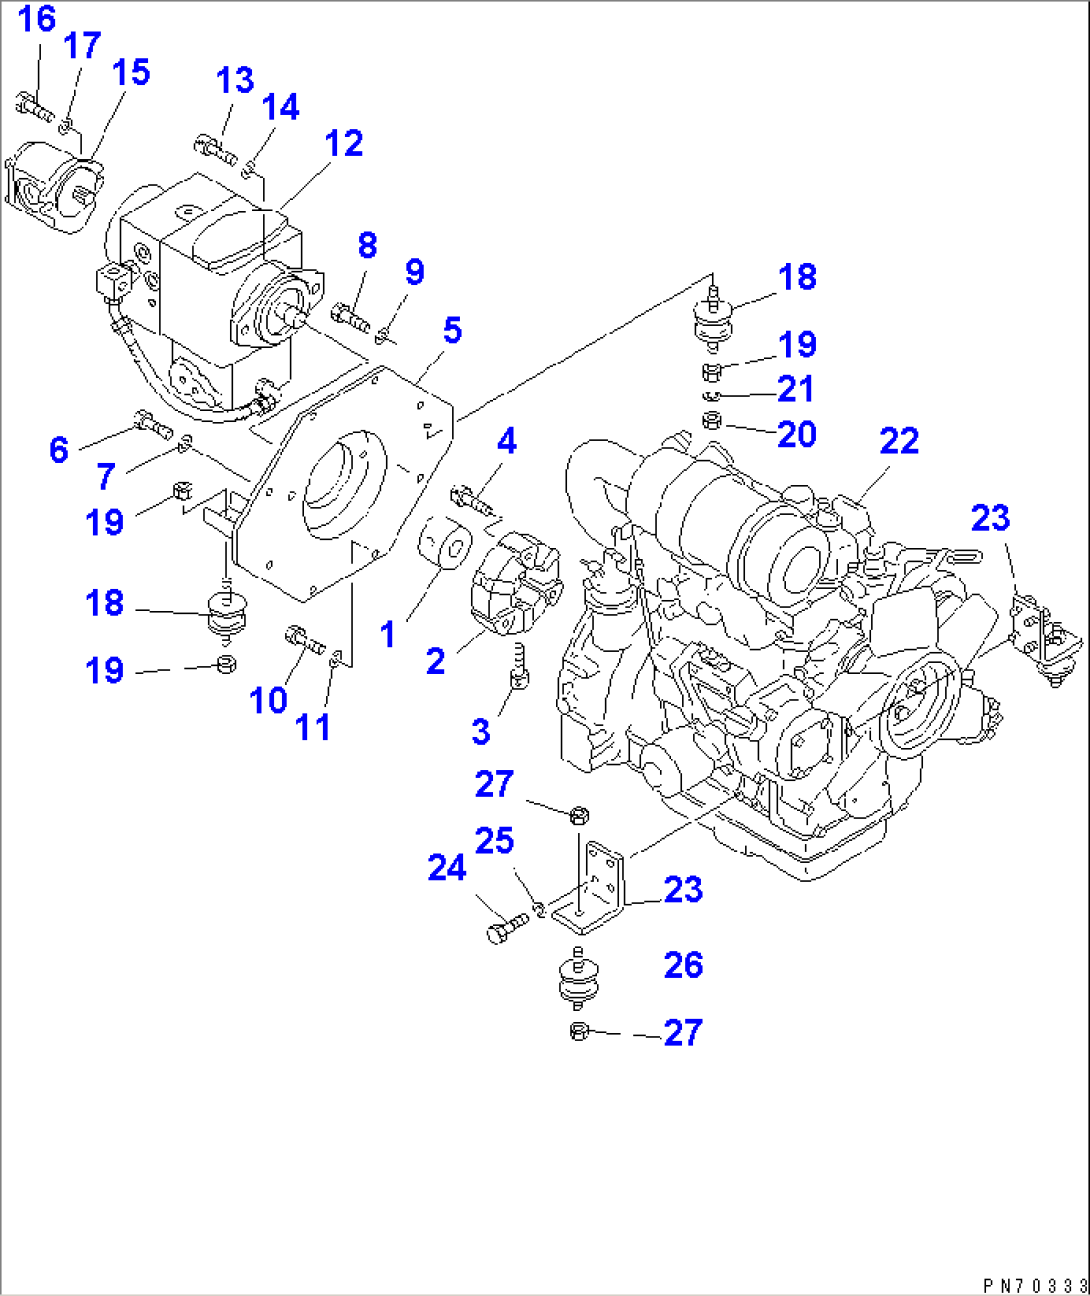 ENGINE AND MAIN PUMP MOUNTING PARTS(#5001-5496)